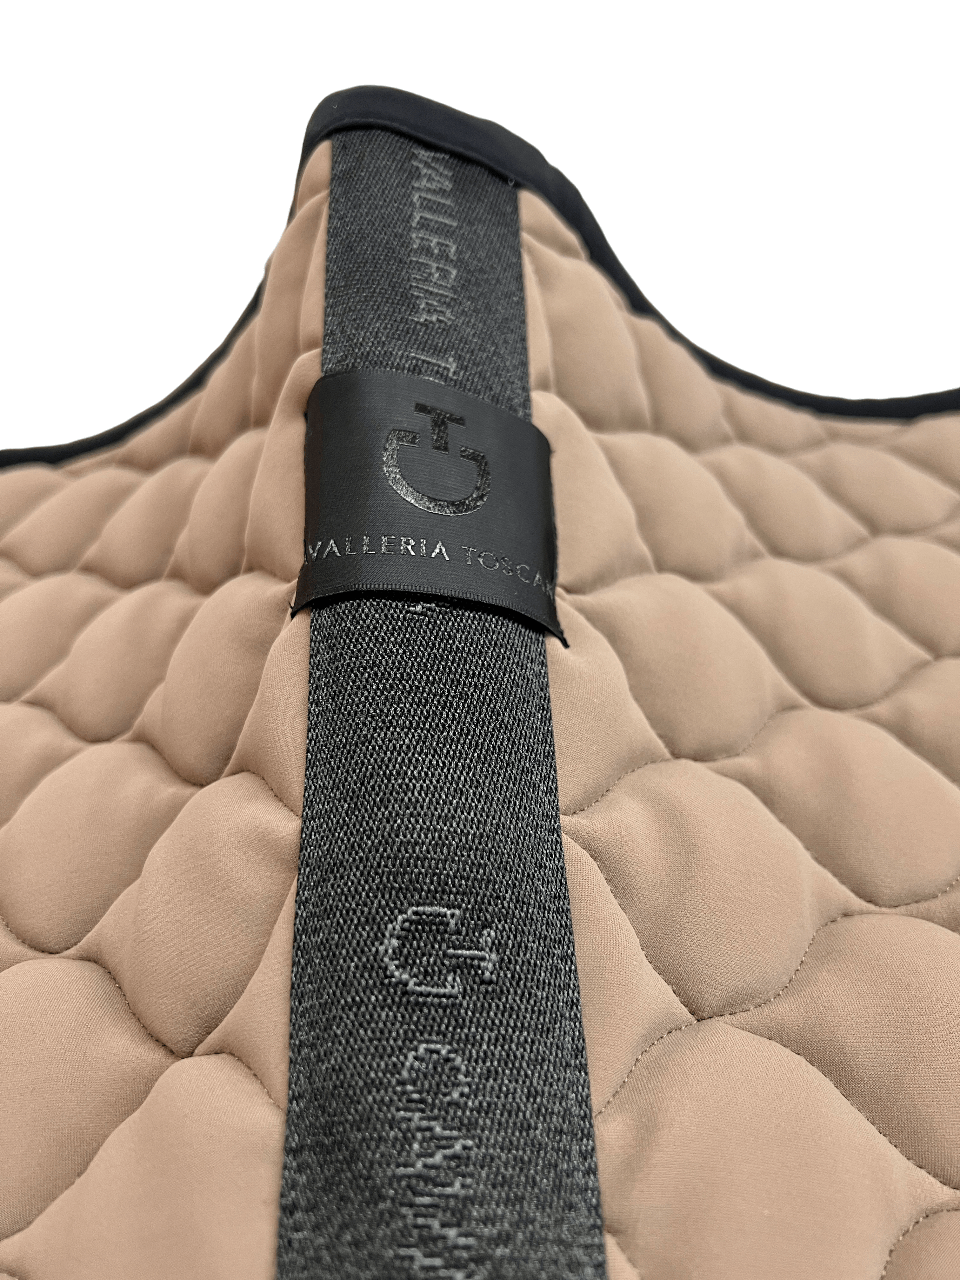 Cavalleria Toscana round quilted saddle pad made of breathable technical jersey.